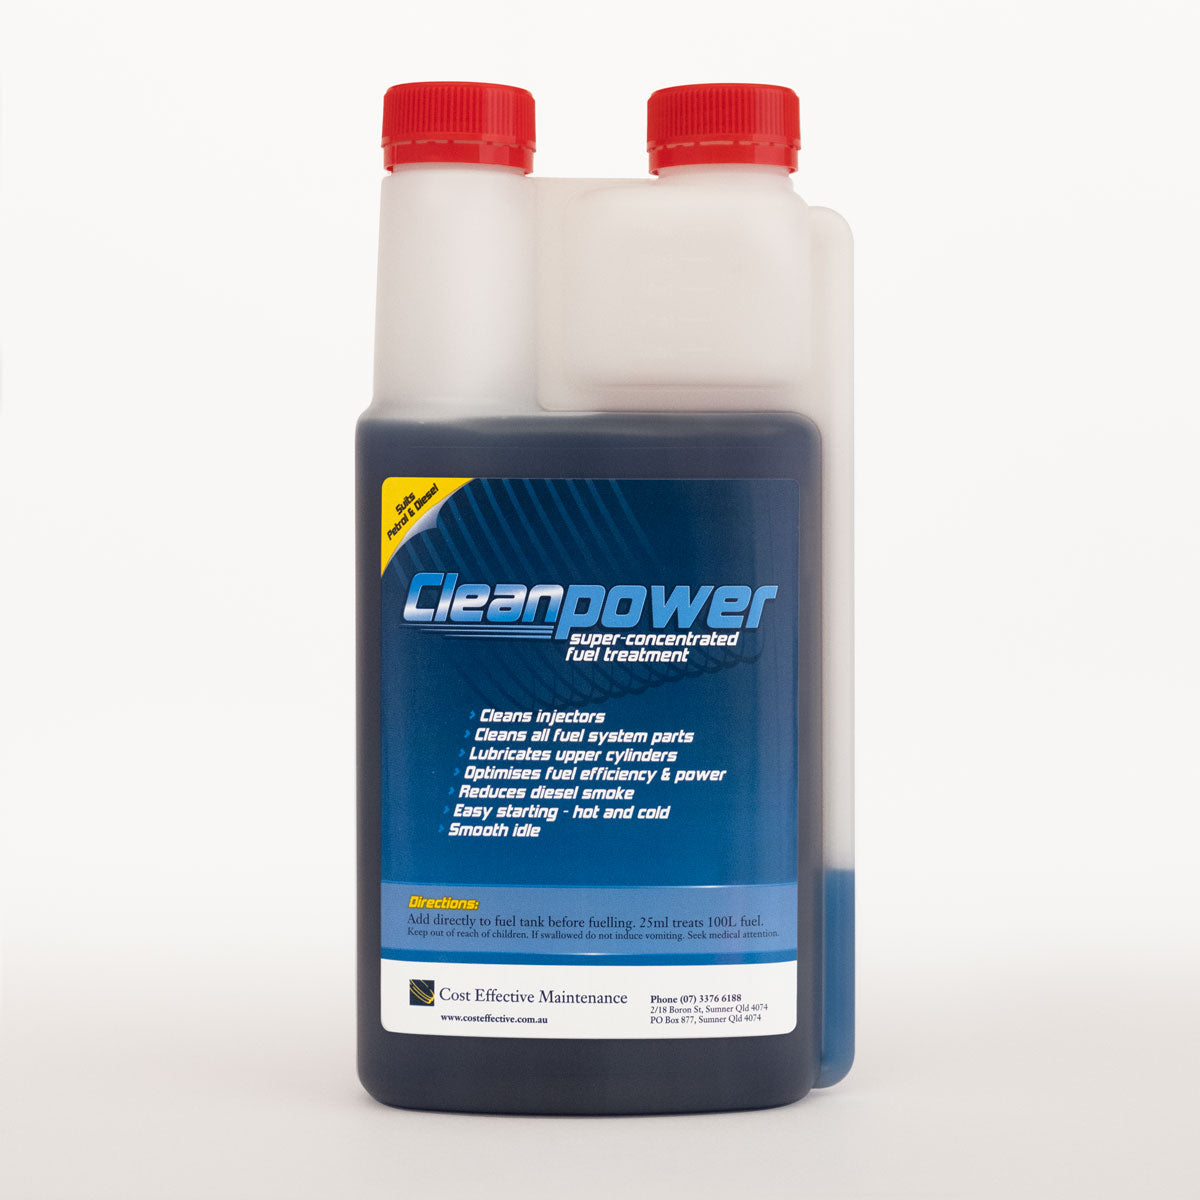 Cost Effective Maintenance Cleanpower Fuel Treatment and Fuel Injector Cleaner